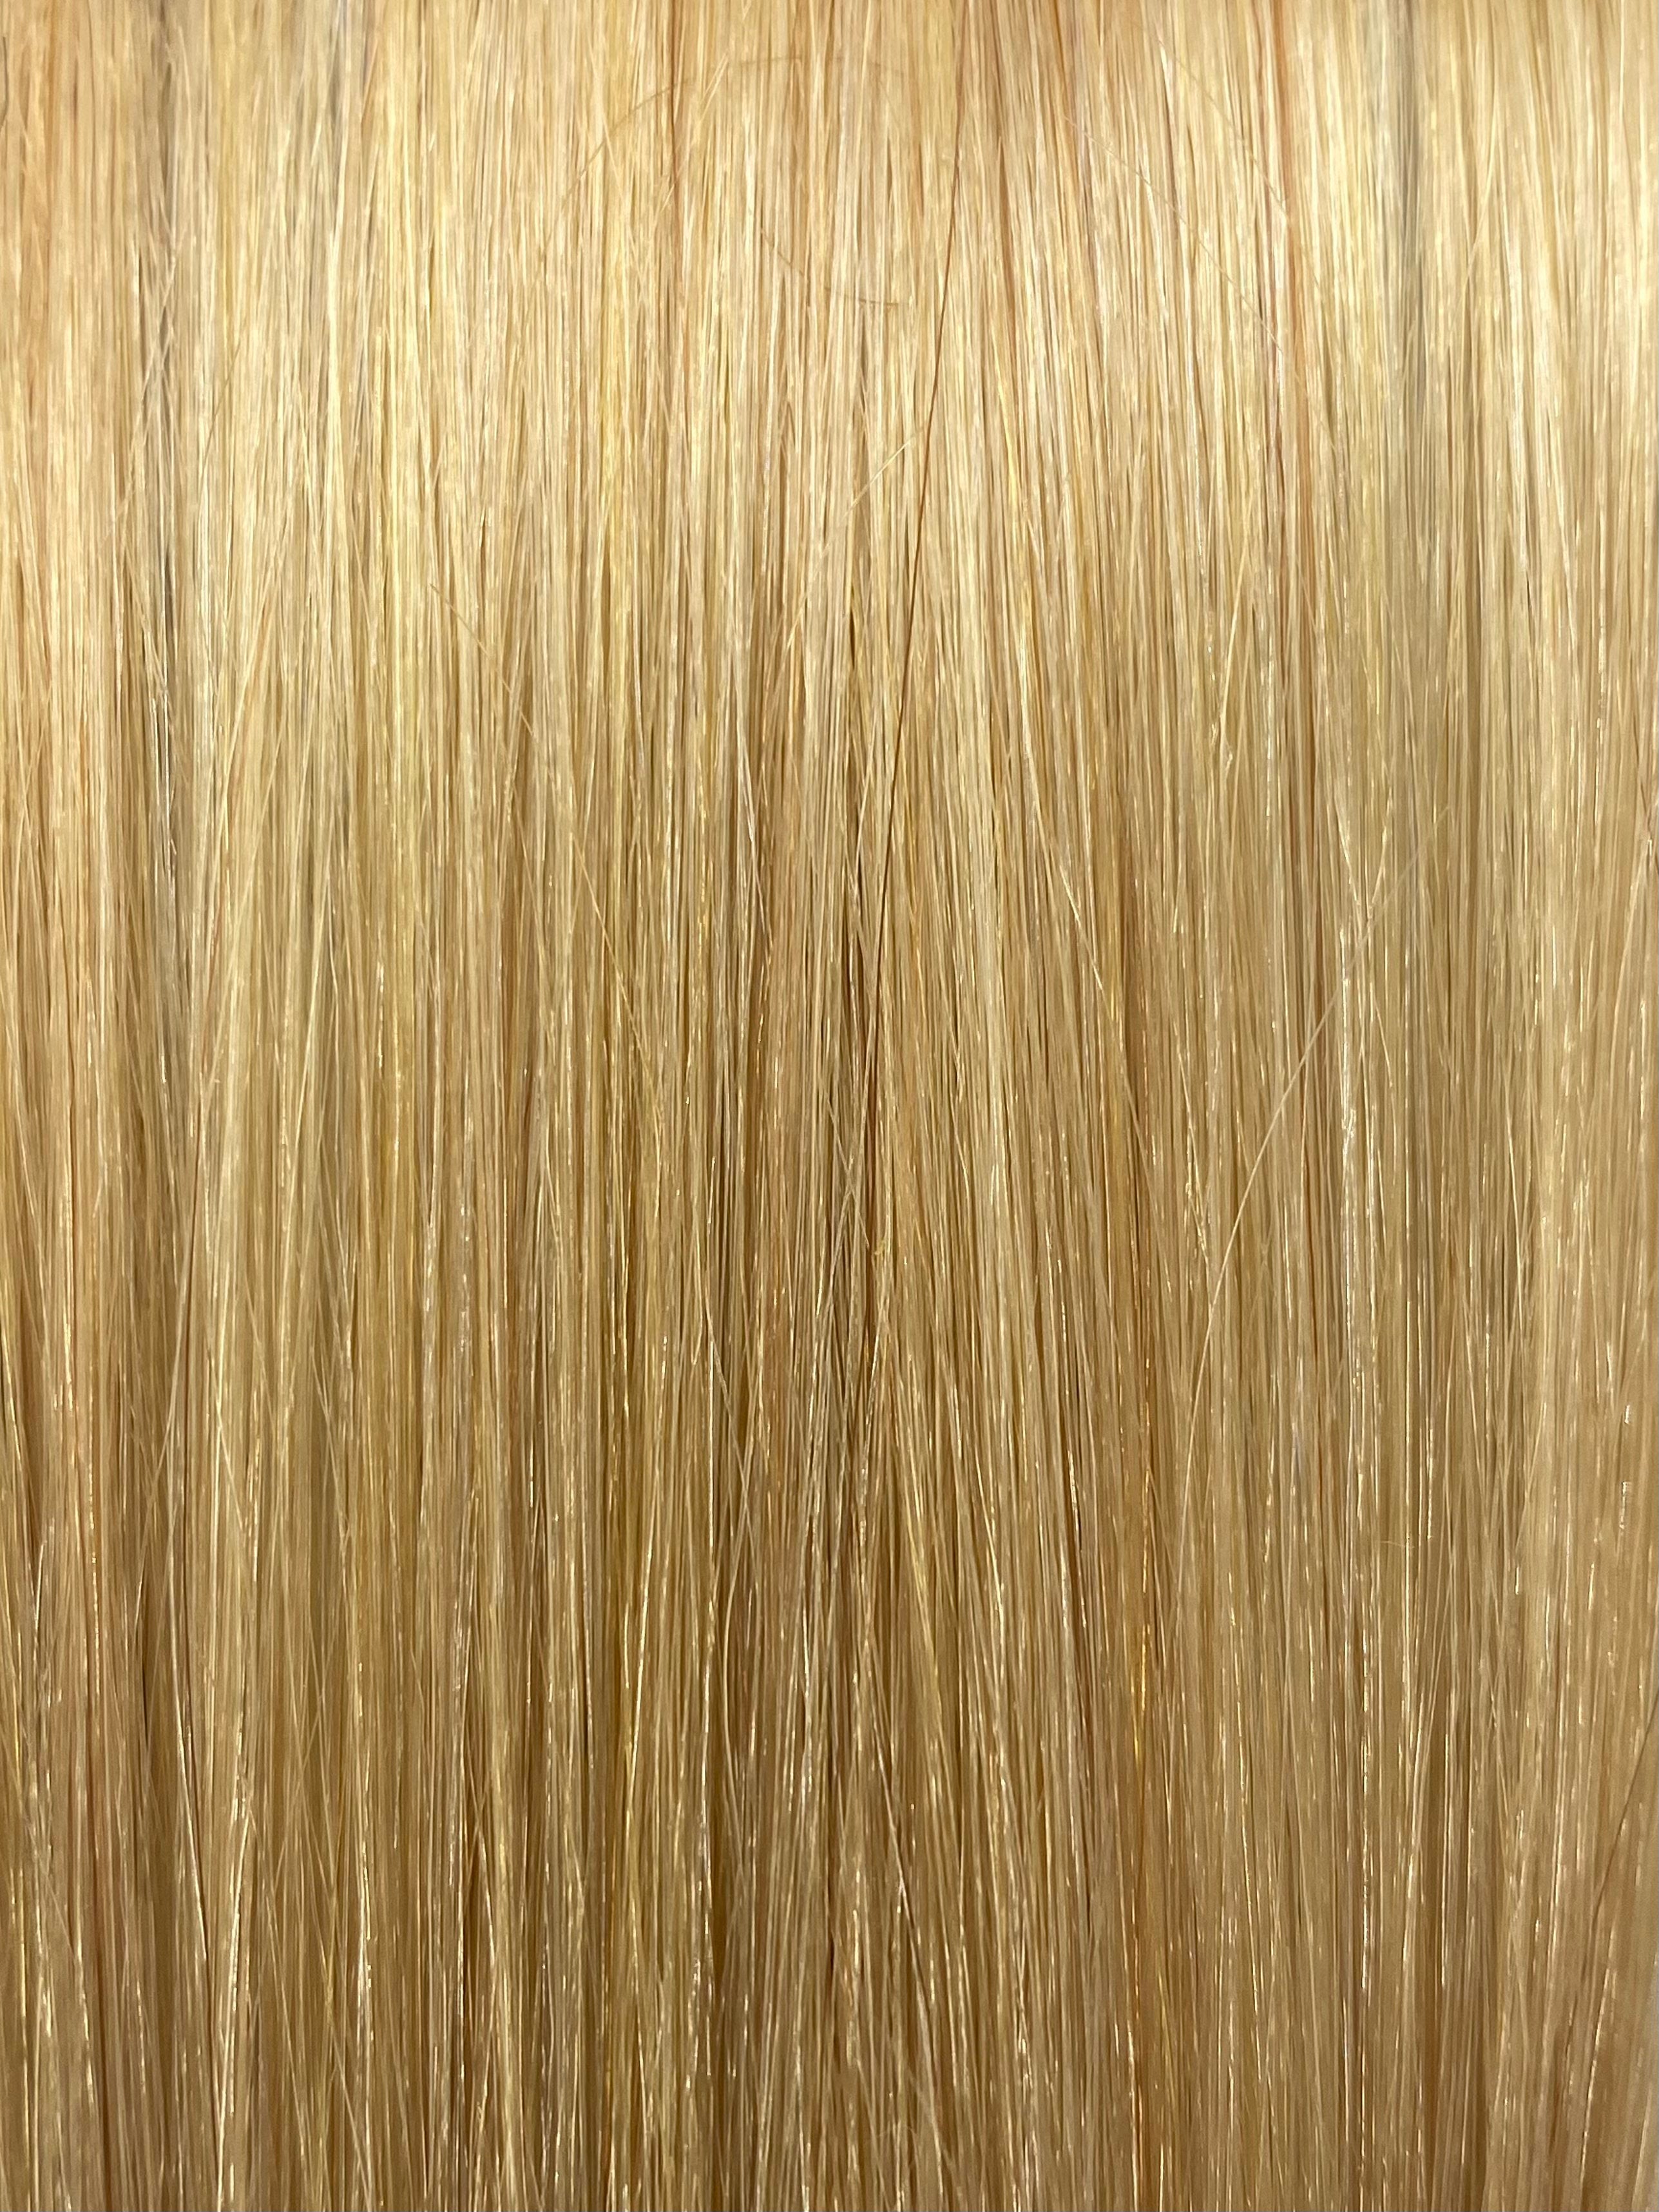 FUSION #DB2 LIGHT GOLDEN BLONDE 50CM/ 20 INCHES  -  20 GRAMS